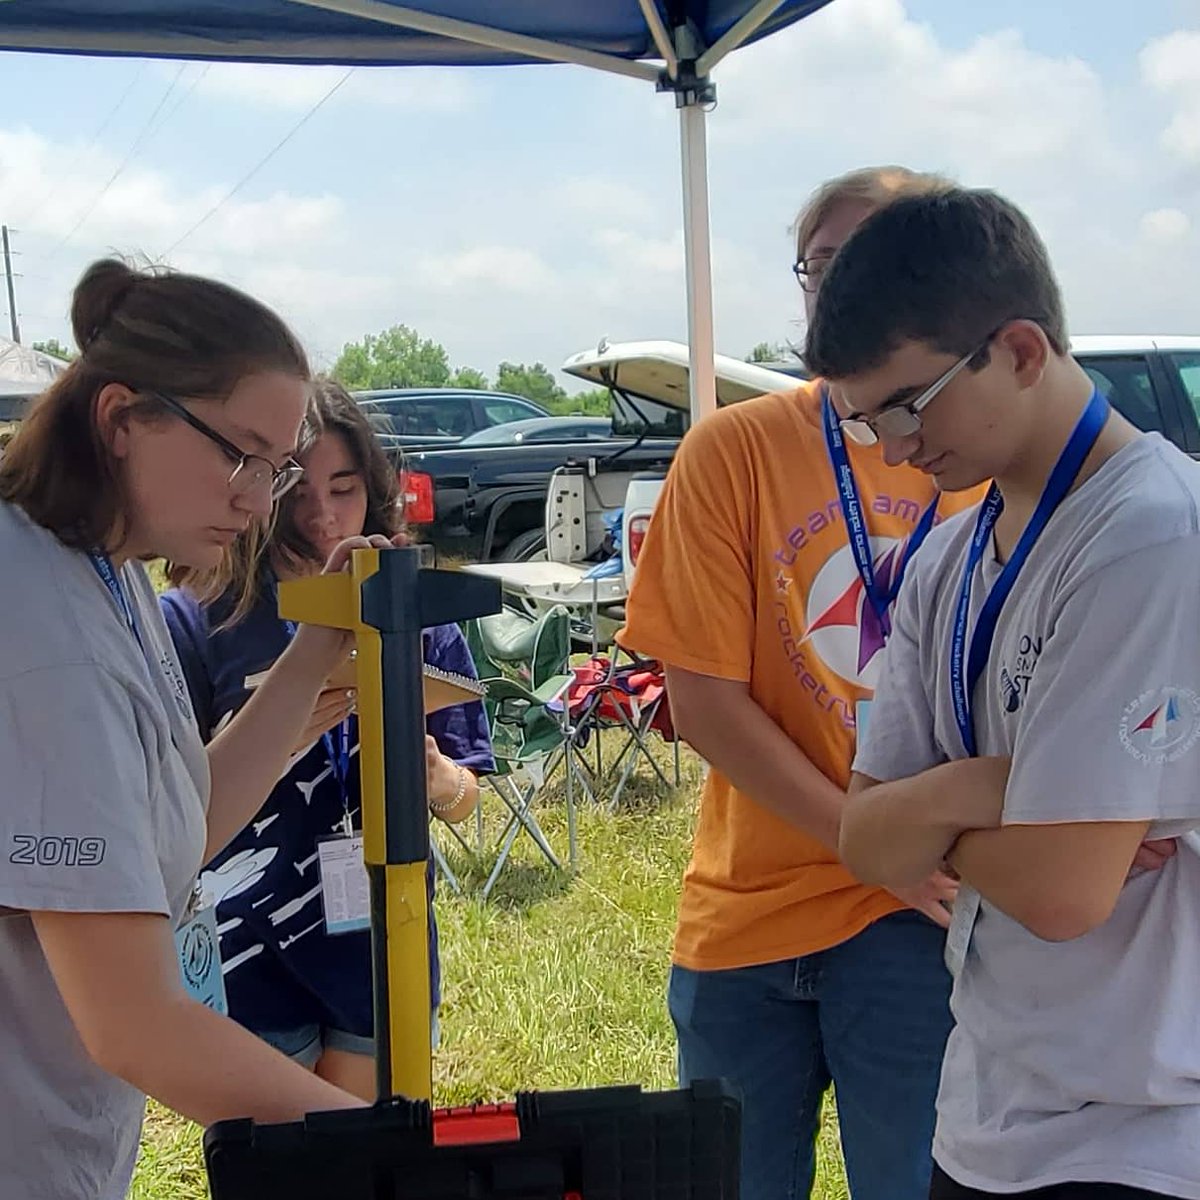 Unpacking and getting our setup area ready before our launch window opens at #tarc21 Nationals. #lincolnrocketry #rocketcontest